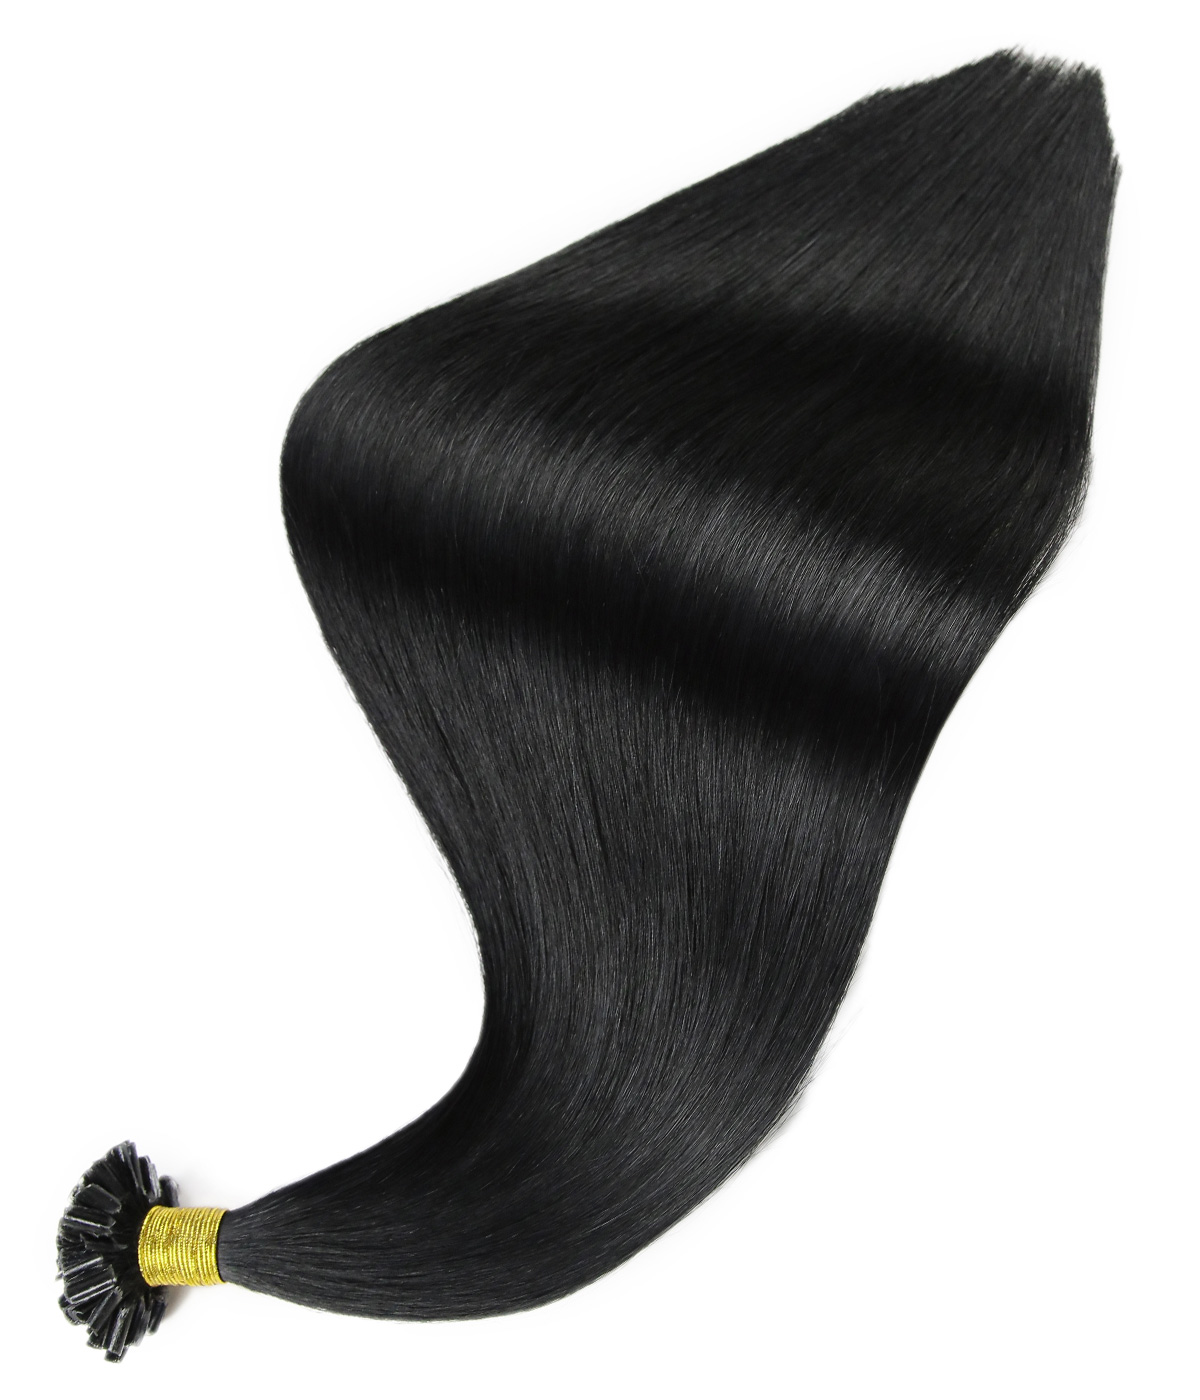 Delux Keratin Fusion U tip Bonded 100% Virgin Human Hair Extensions for pro 100g